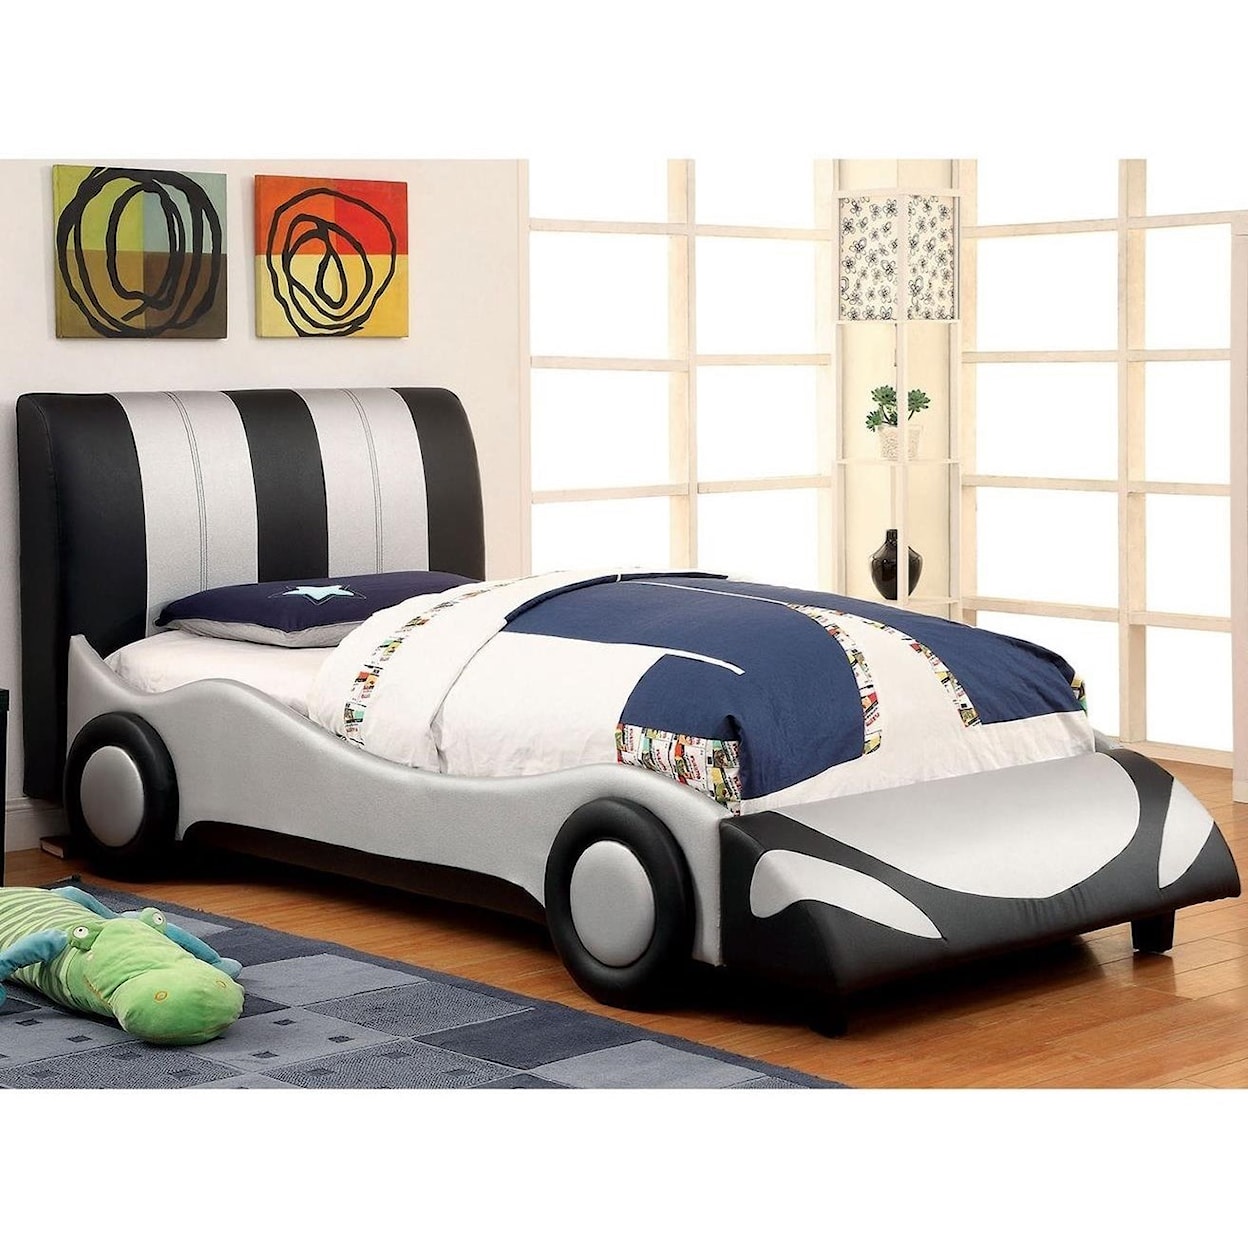 Furniture of America Super Racer Twin Bed